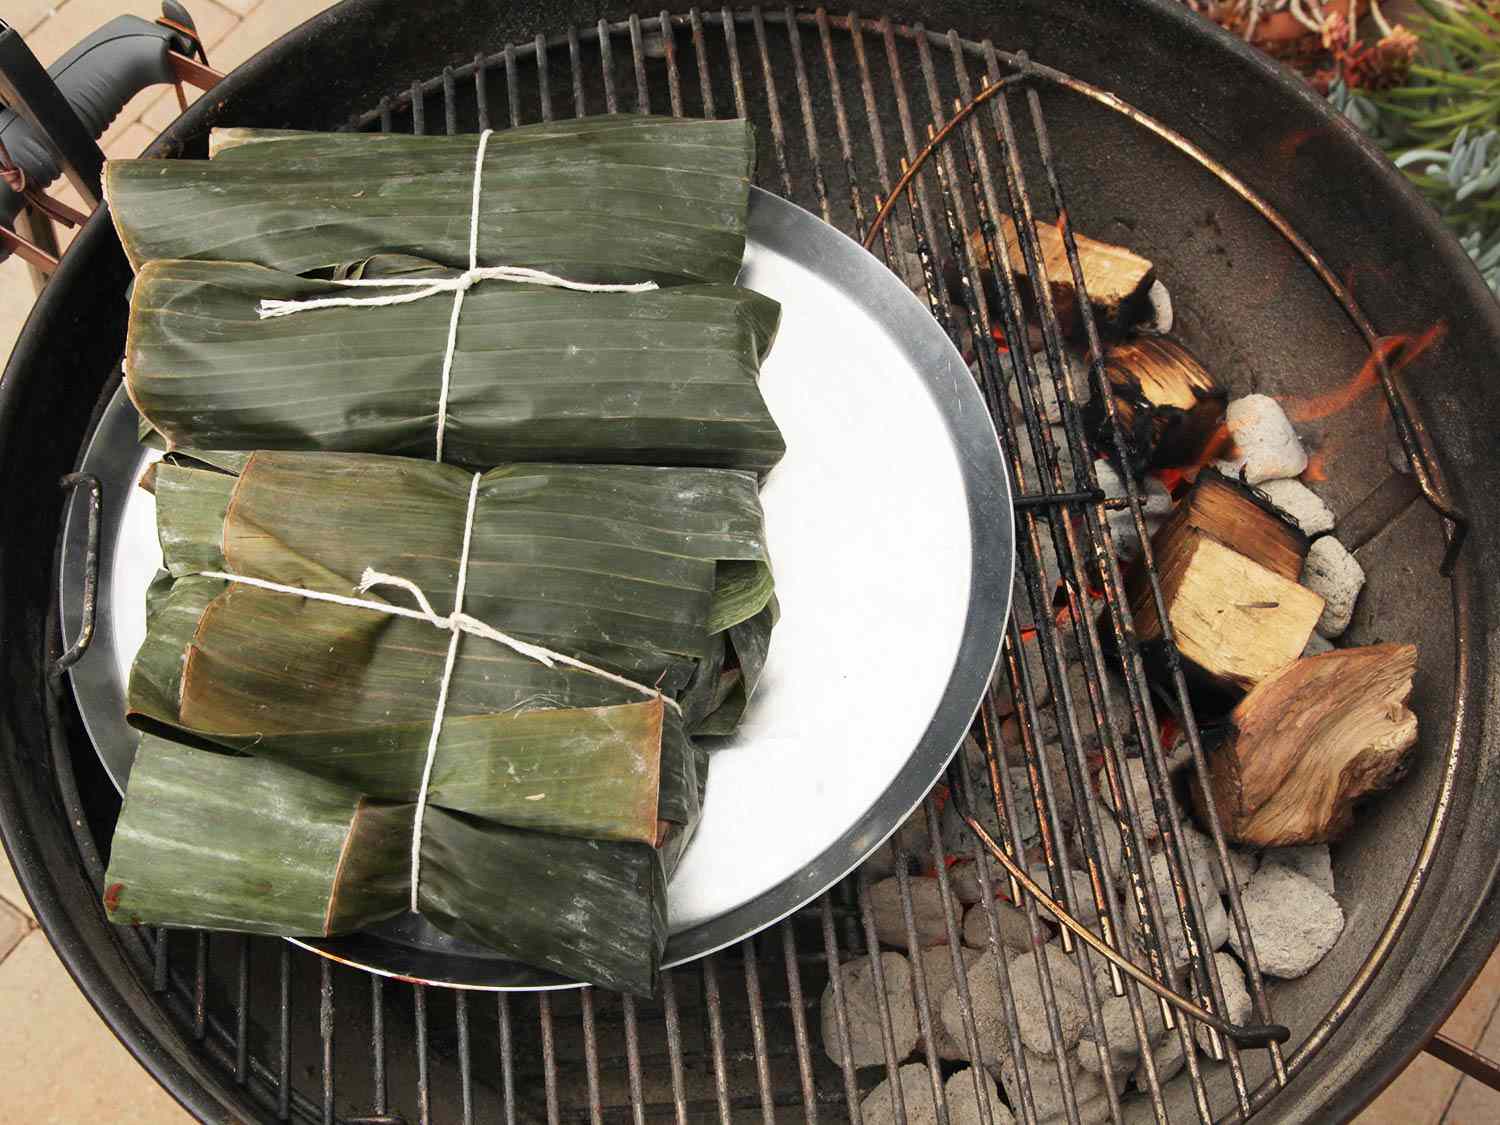 Roasting banana leaf-wrapped pork on a grill over indirect heat.